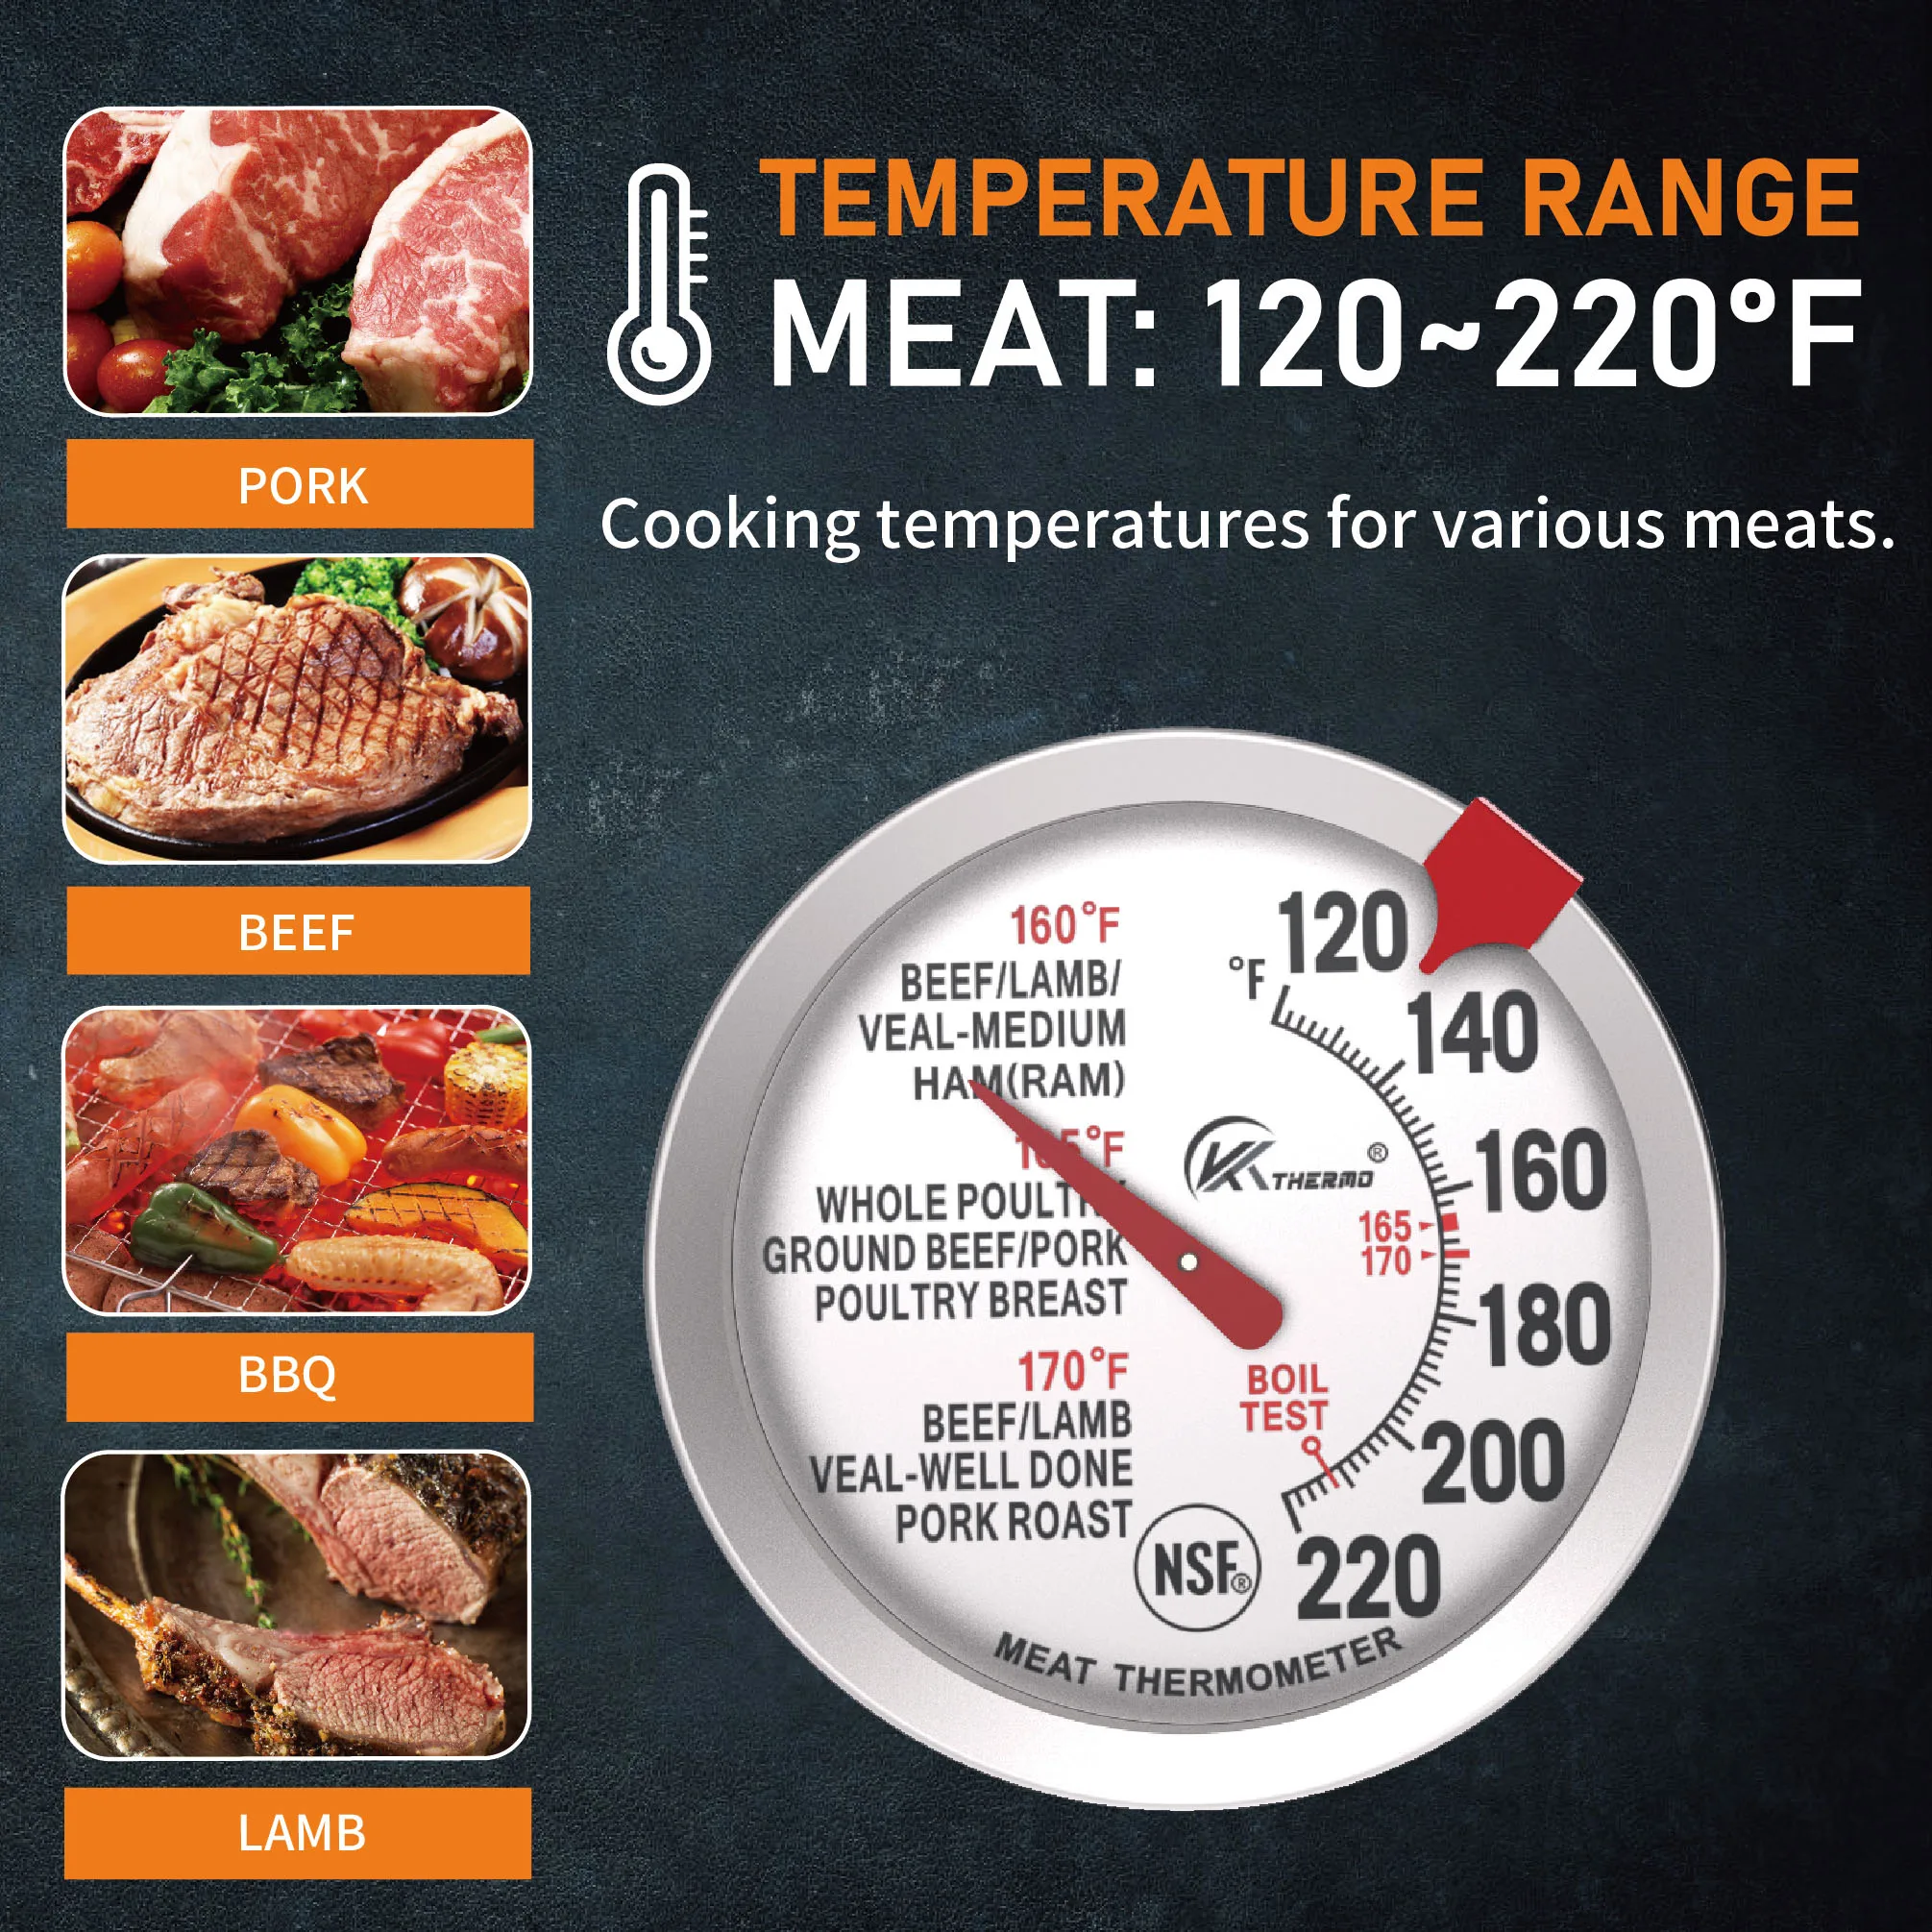 https://ae01.alicdn.com/kf/S47dd3568dec04a1c937aedbcfb618f23V/Oven-Meat-Cooking-Thermometer-with-Silicon-Mat-NSF-Approved-Large-Dial-Oven-Thermometer-2-6-Inch.jpg